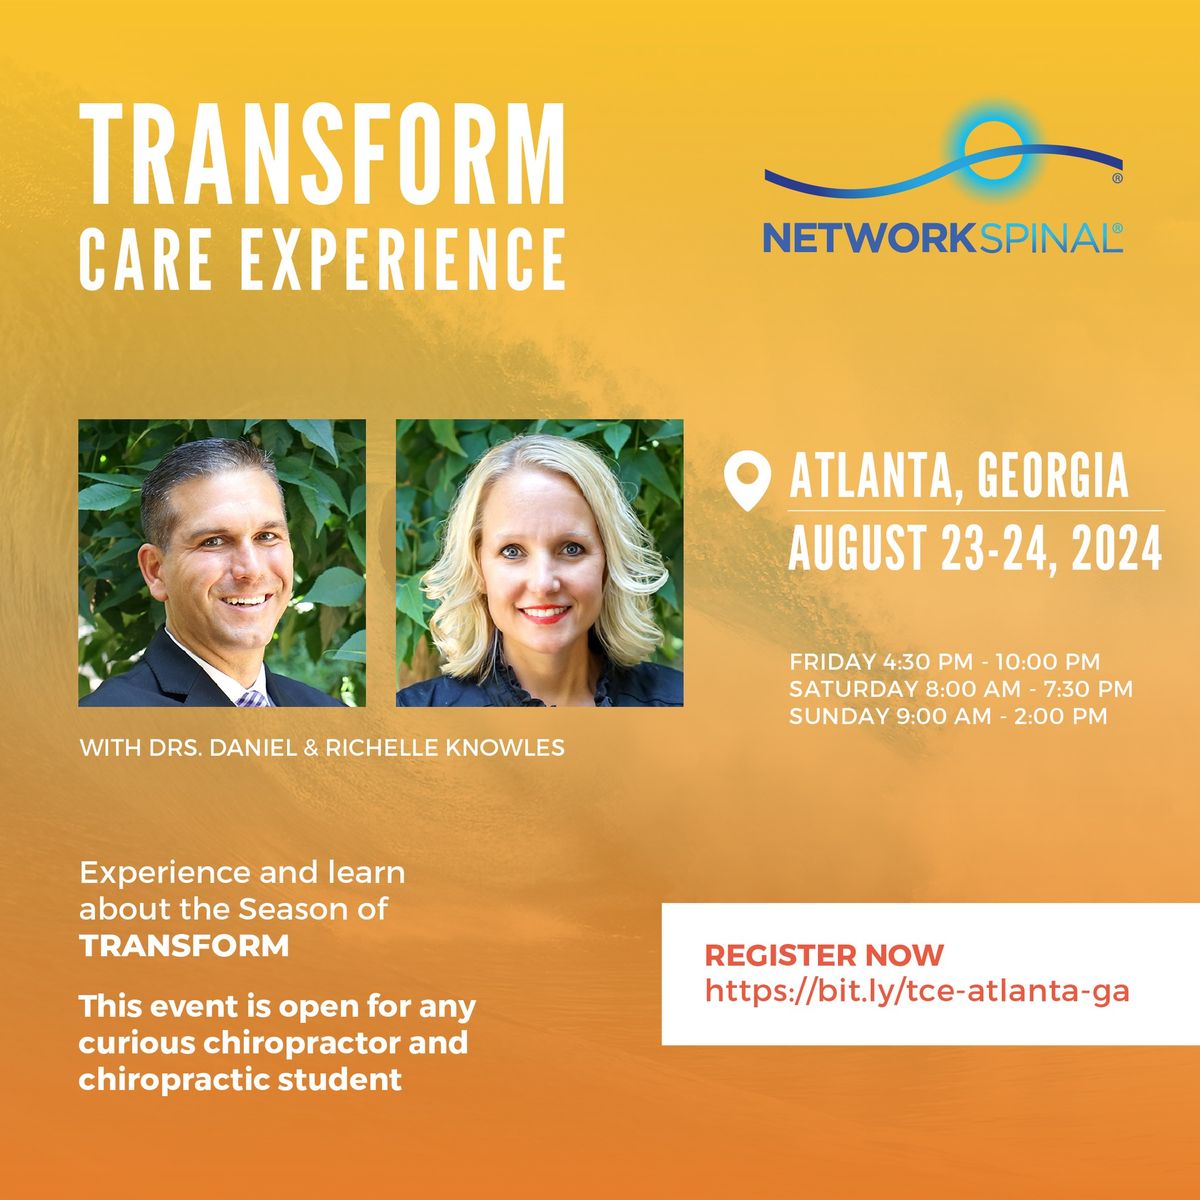 NetworkSpinal Transform Care Experience with Drs. Daniel and Richelle Knowles